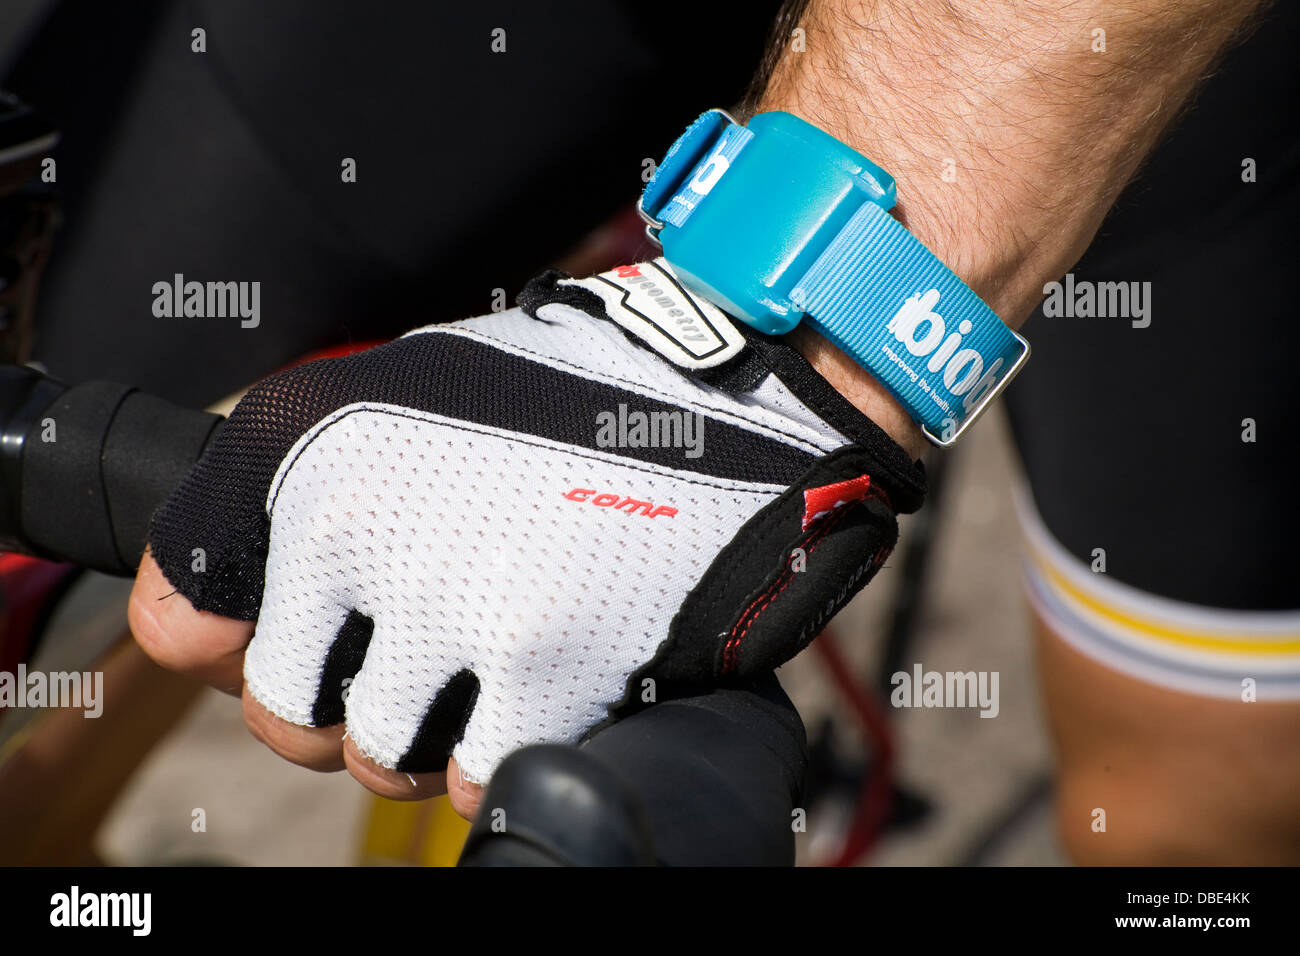 An Activity Monitor being worn on the wrist of person carrying out an activity & taking part in research conducted by UK Biobank Stock Photo